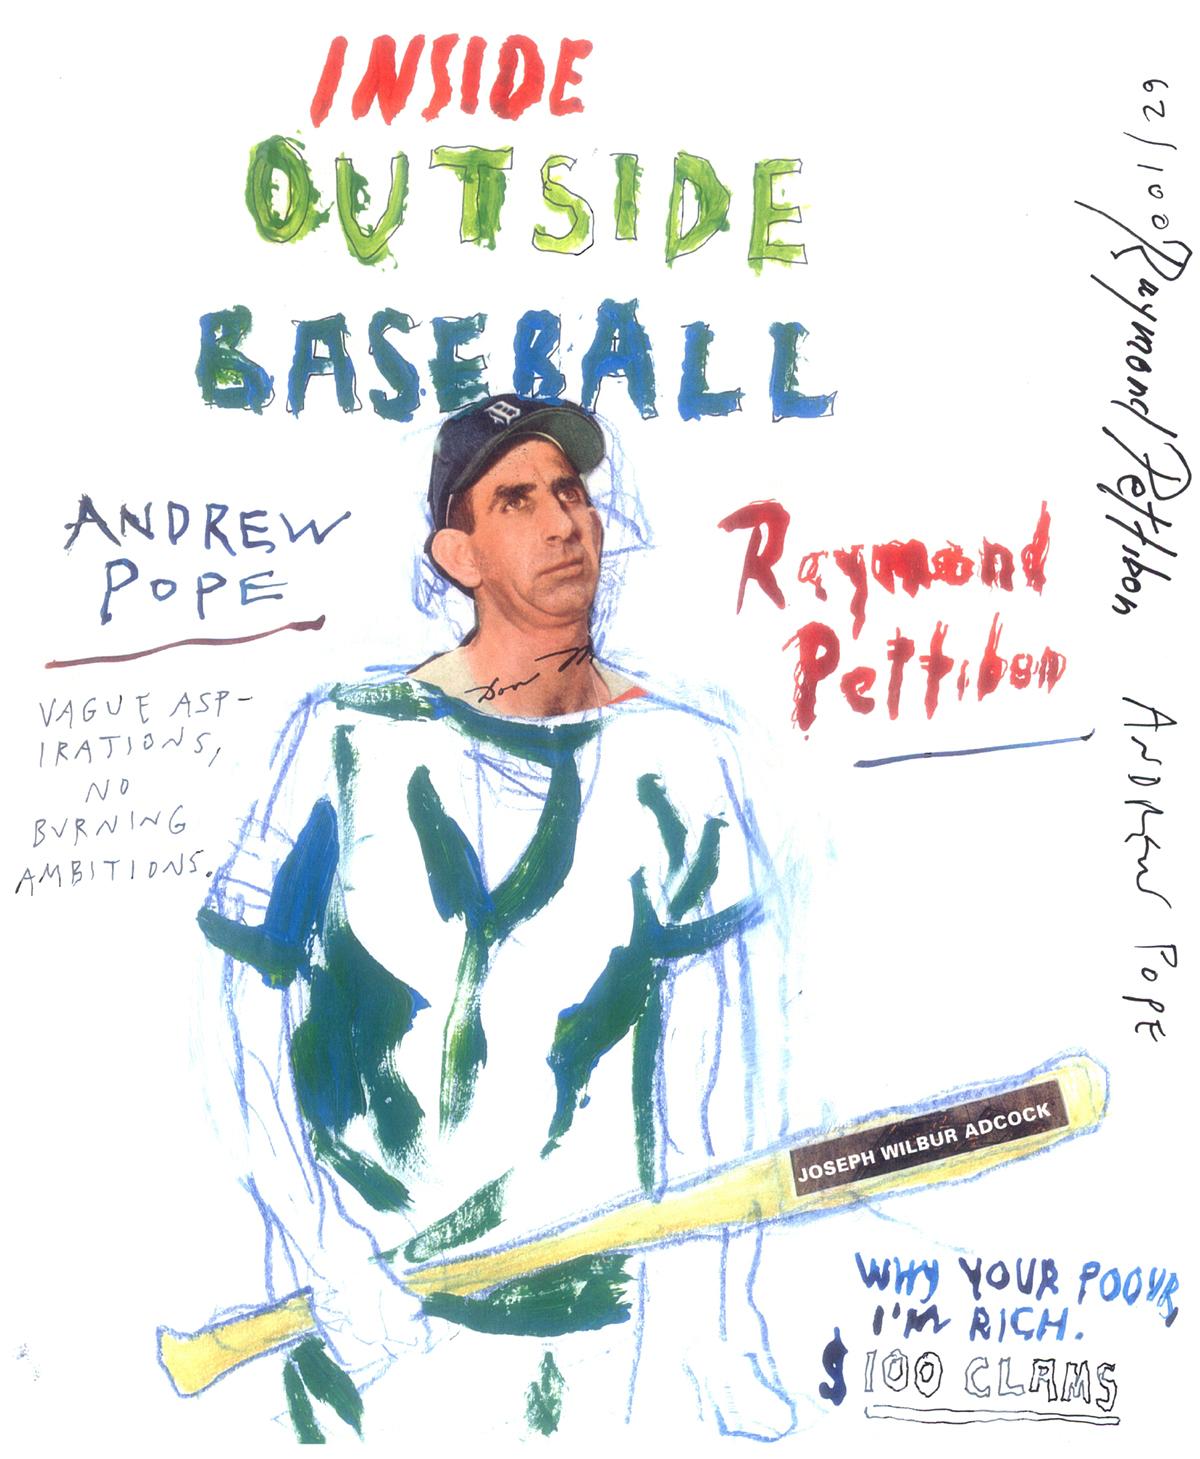 Raymond Pettibon, Andrew Pope: Inside Outside Baseball:
A rare 2014 limited edition, hand-signed zine created by Raymond Pettibon & Andrew Pope to benefit New York's Printed Matter Inc. This scarce work quickly sold out upon its release.

Medium: